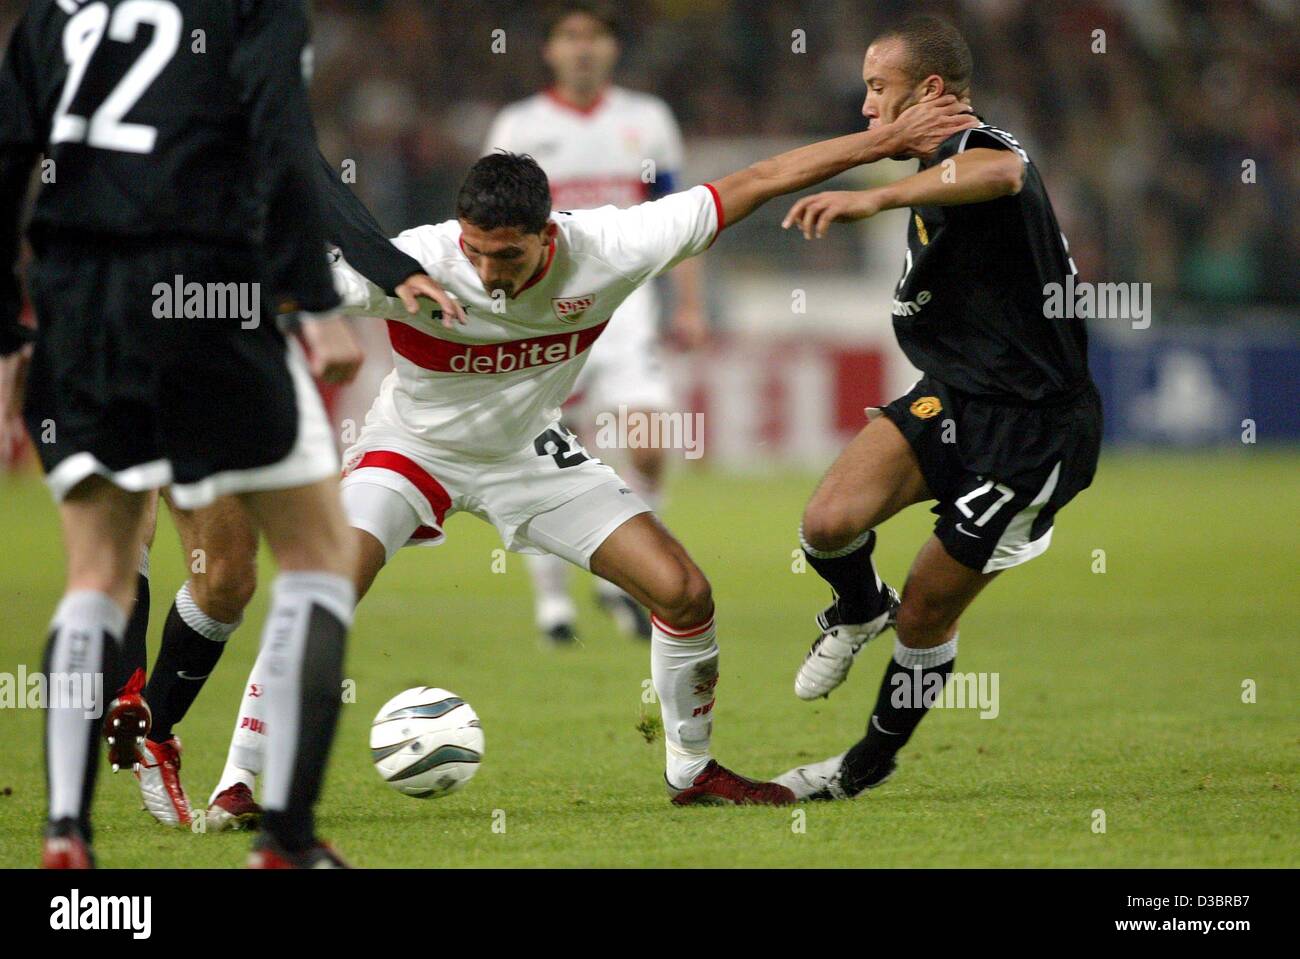 (dpa) - Stuttgart's forward Kevin Kuranyi (C) tries to keep Manchester's French defender Mikael Silvestre (R) away from the ball, during the second group game of the European soccer Champions League opposing VfB Stuttgart and Manchester United in Stuttgart, Germany, 1 October 2003. Stuttgart won the Stock Photo